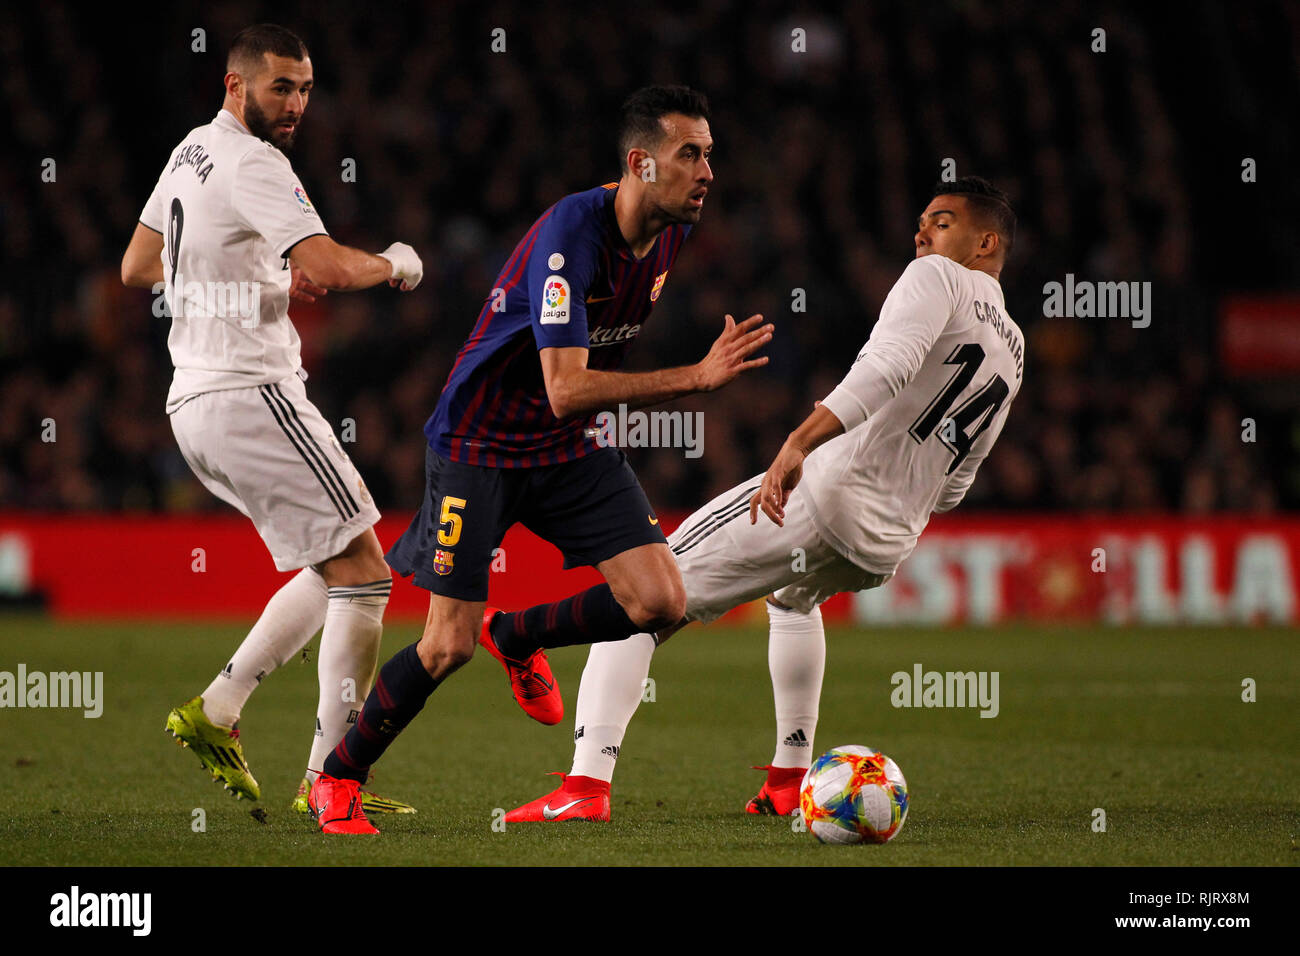 Spain La Copa, Semi finals, First Leg, FC Barcelona vs. Real Madrid, reporting live during the game Stock Photo